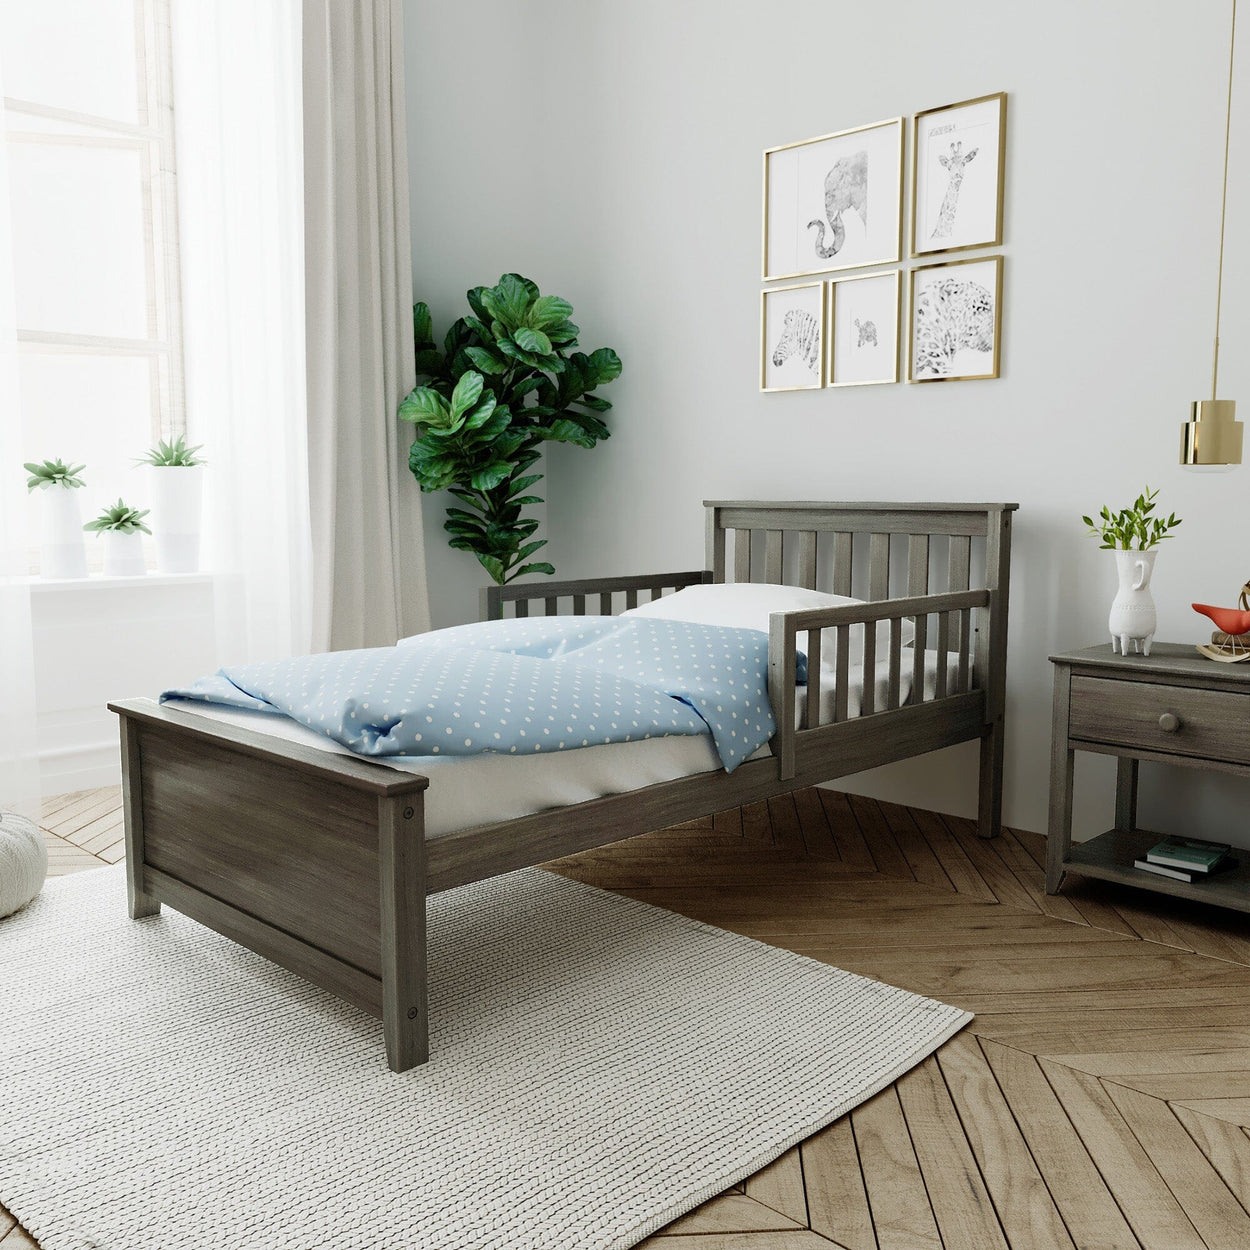 180210151209 : Kids Beds Twin Bed with Two Guard Rails, Clay